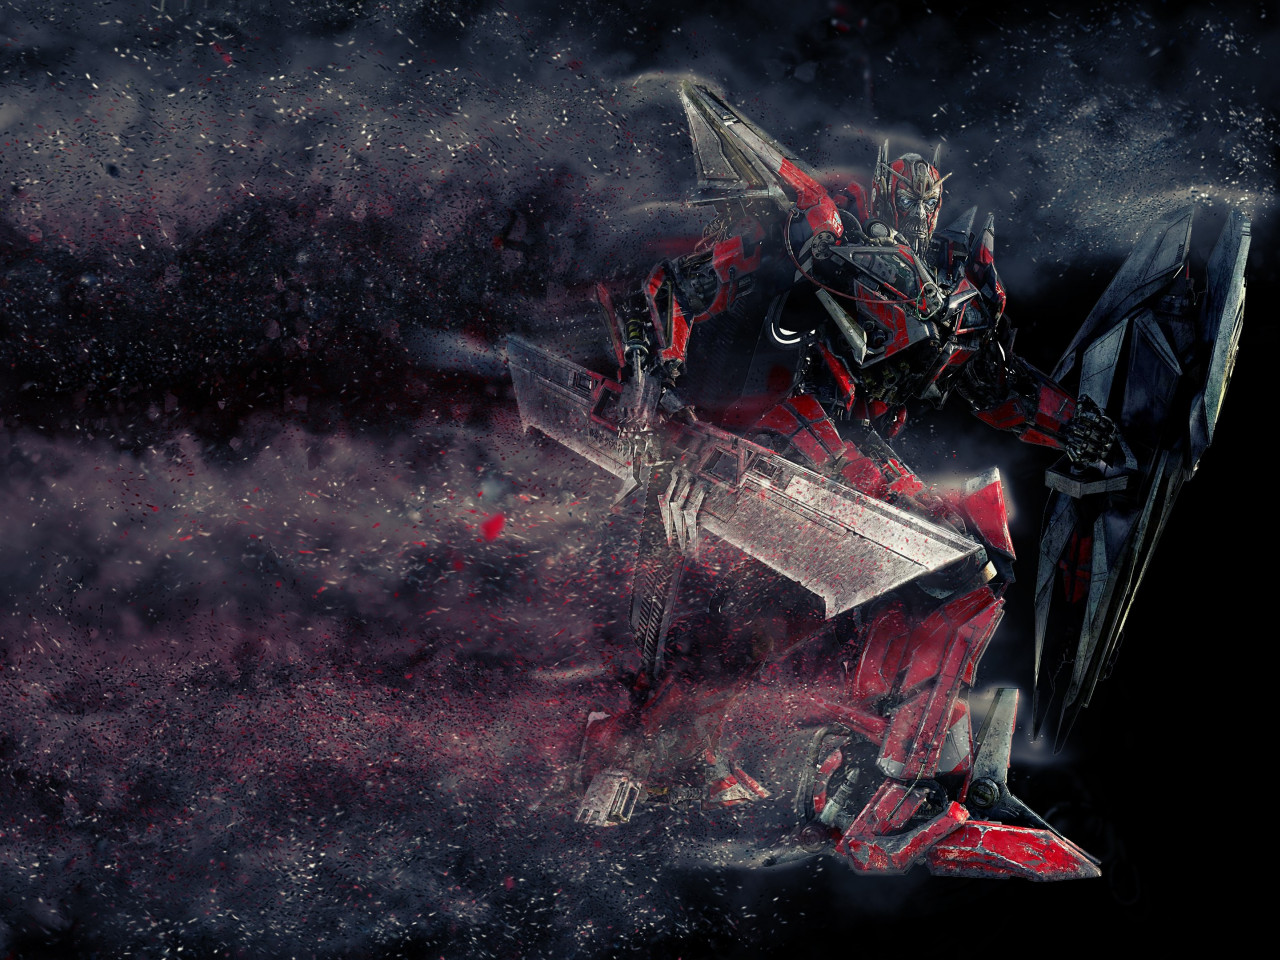 Sentinel Prime from Transformers wallpaper 1280x960